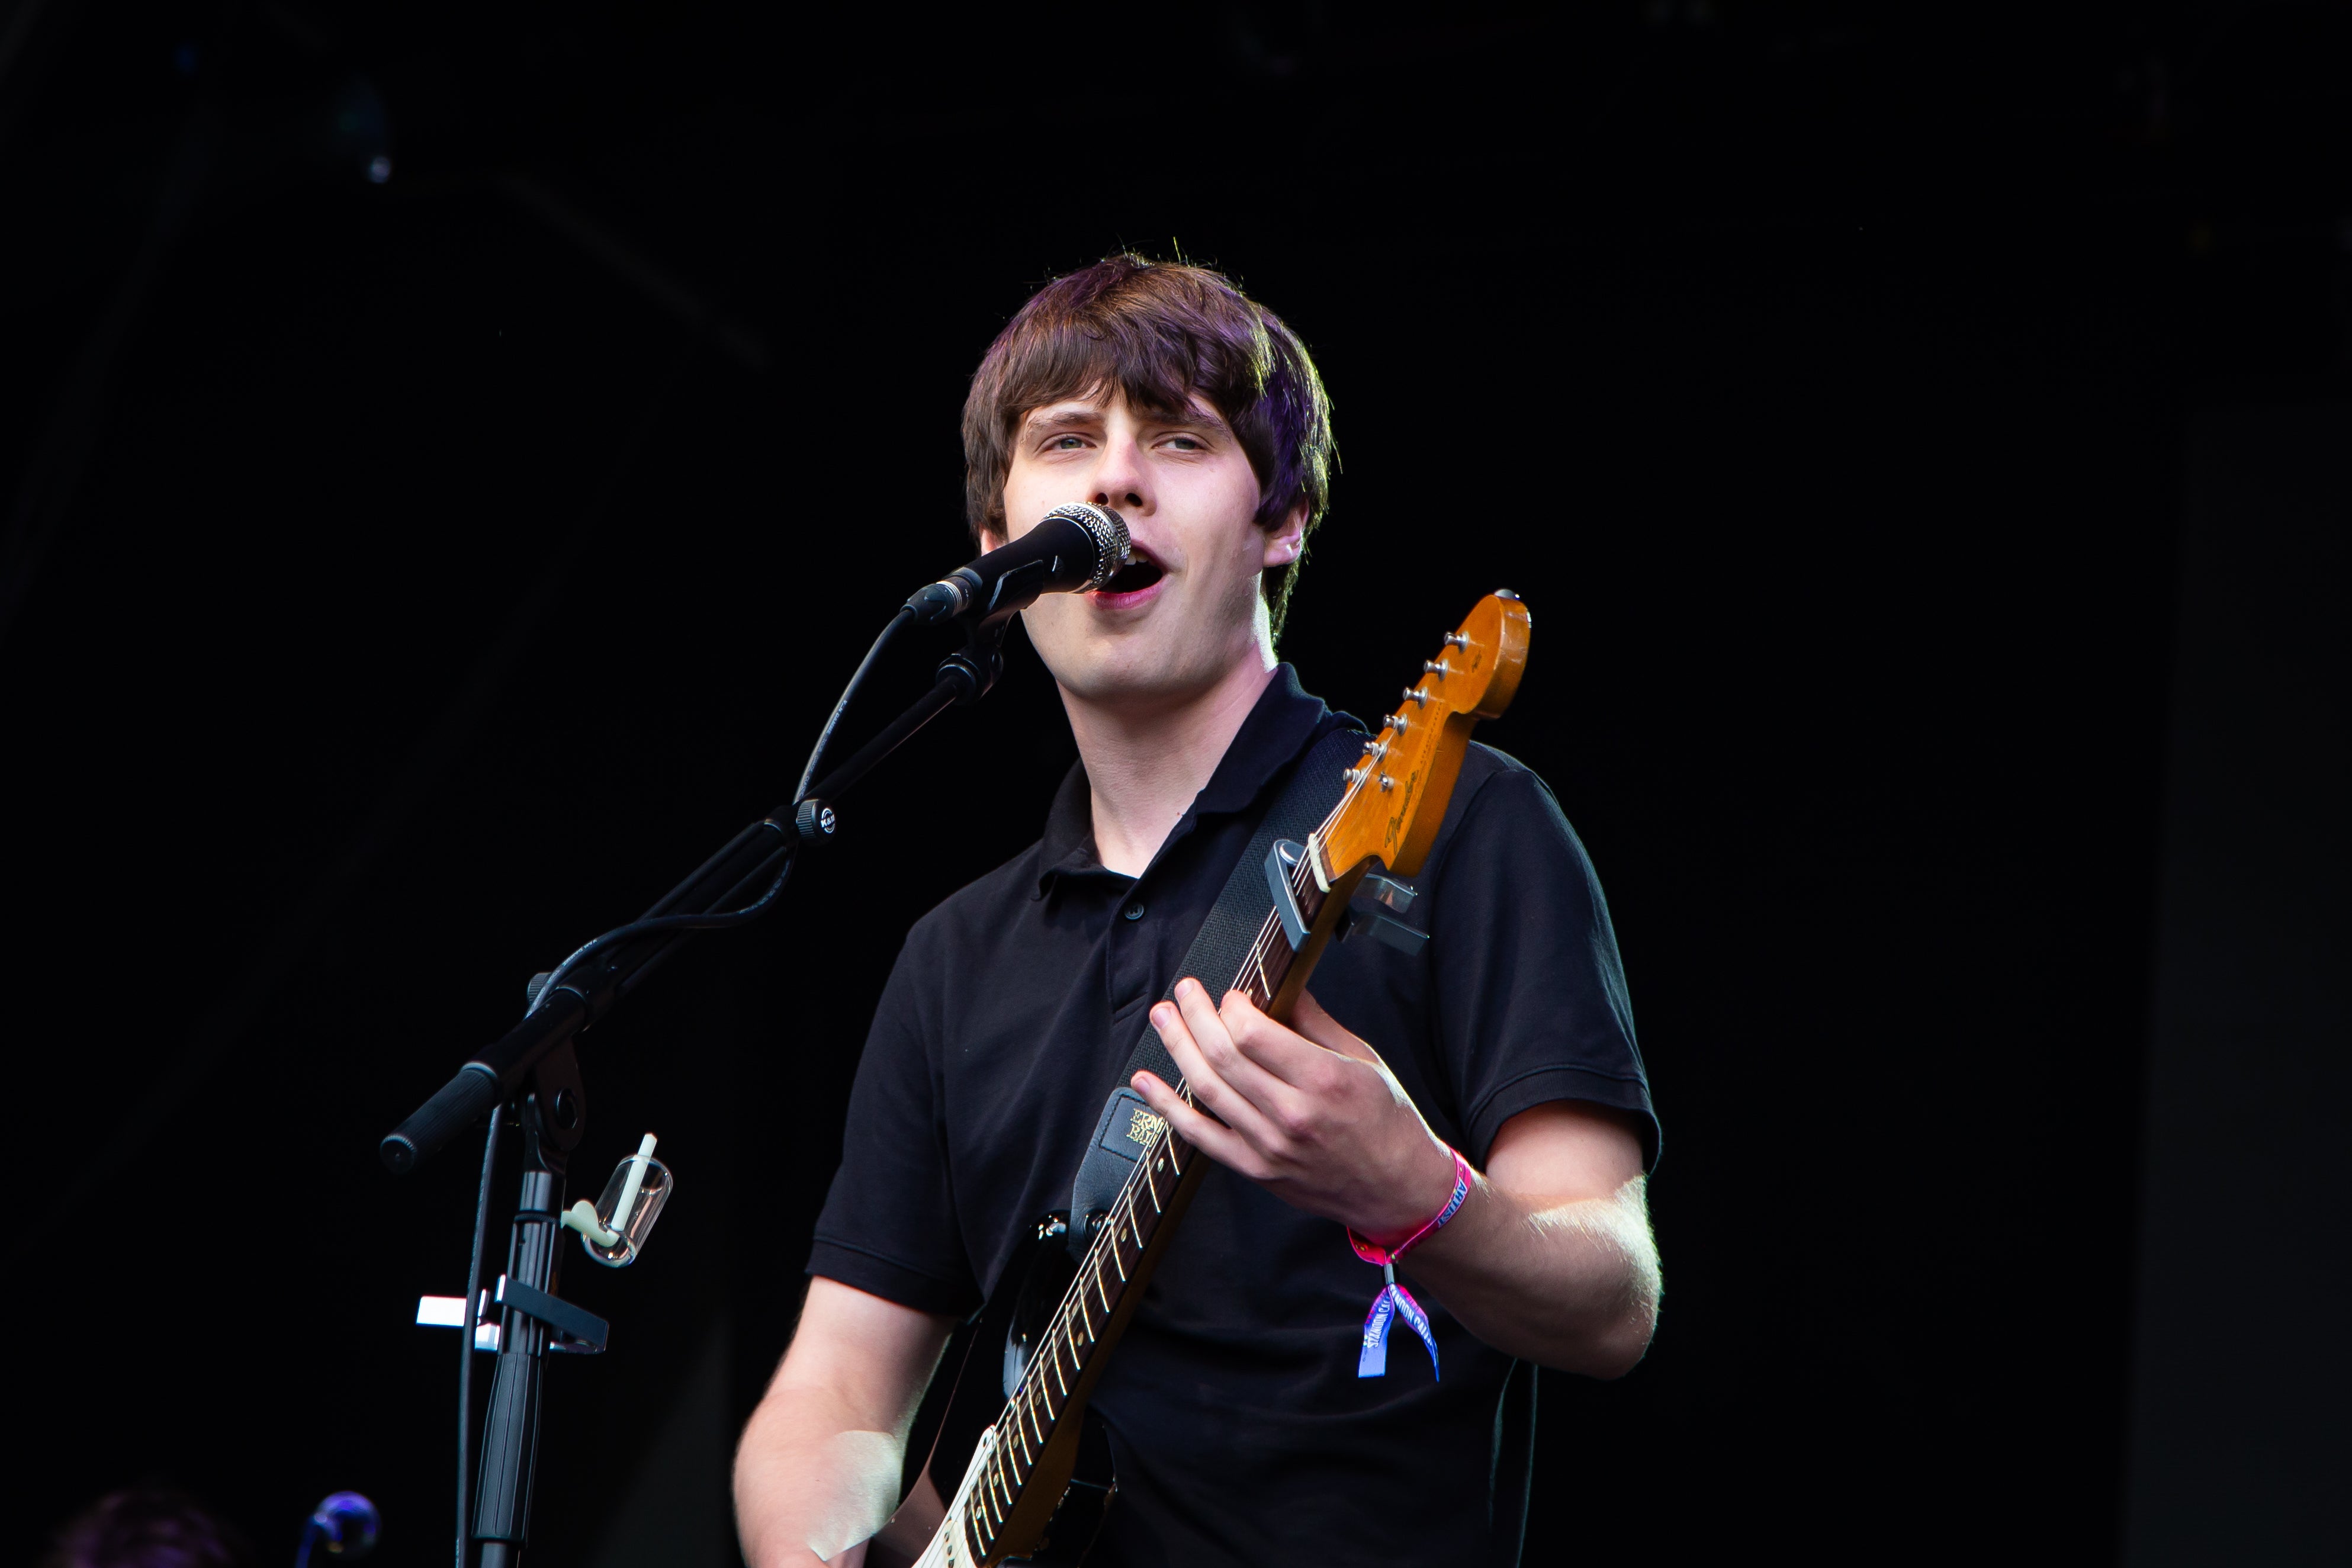 Jake Bugg will join Gallagher and Squire on tour